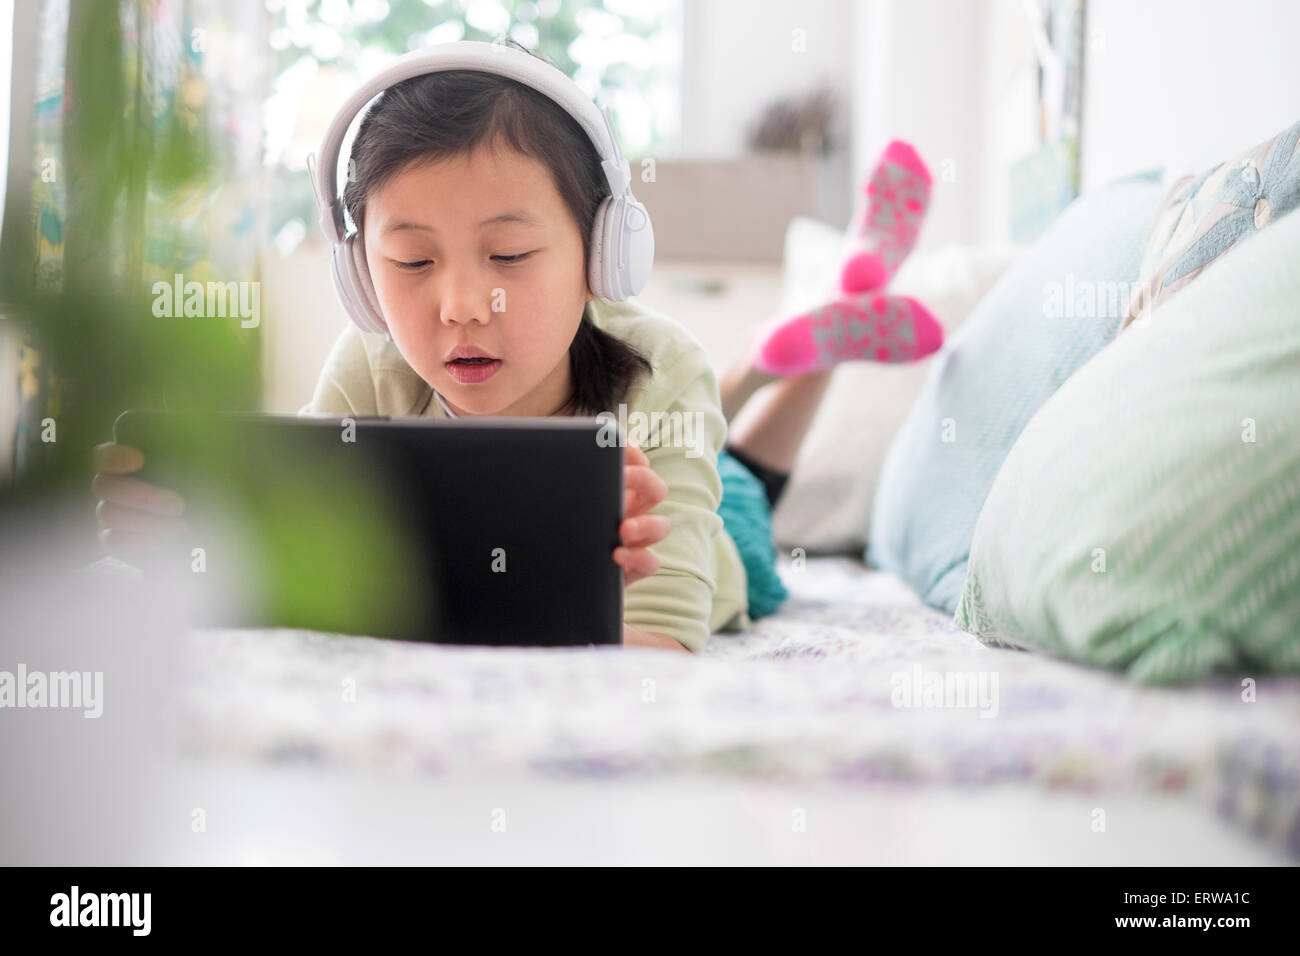 Chinese girl using digital tablet with headphones on bed Banque D'Images